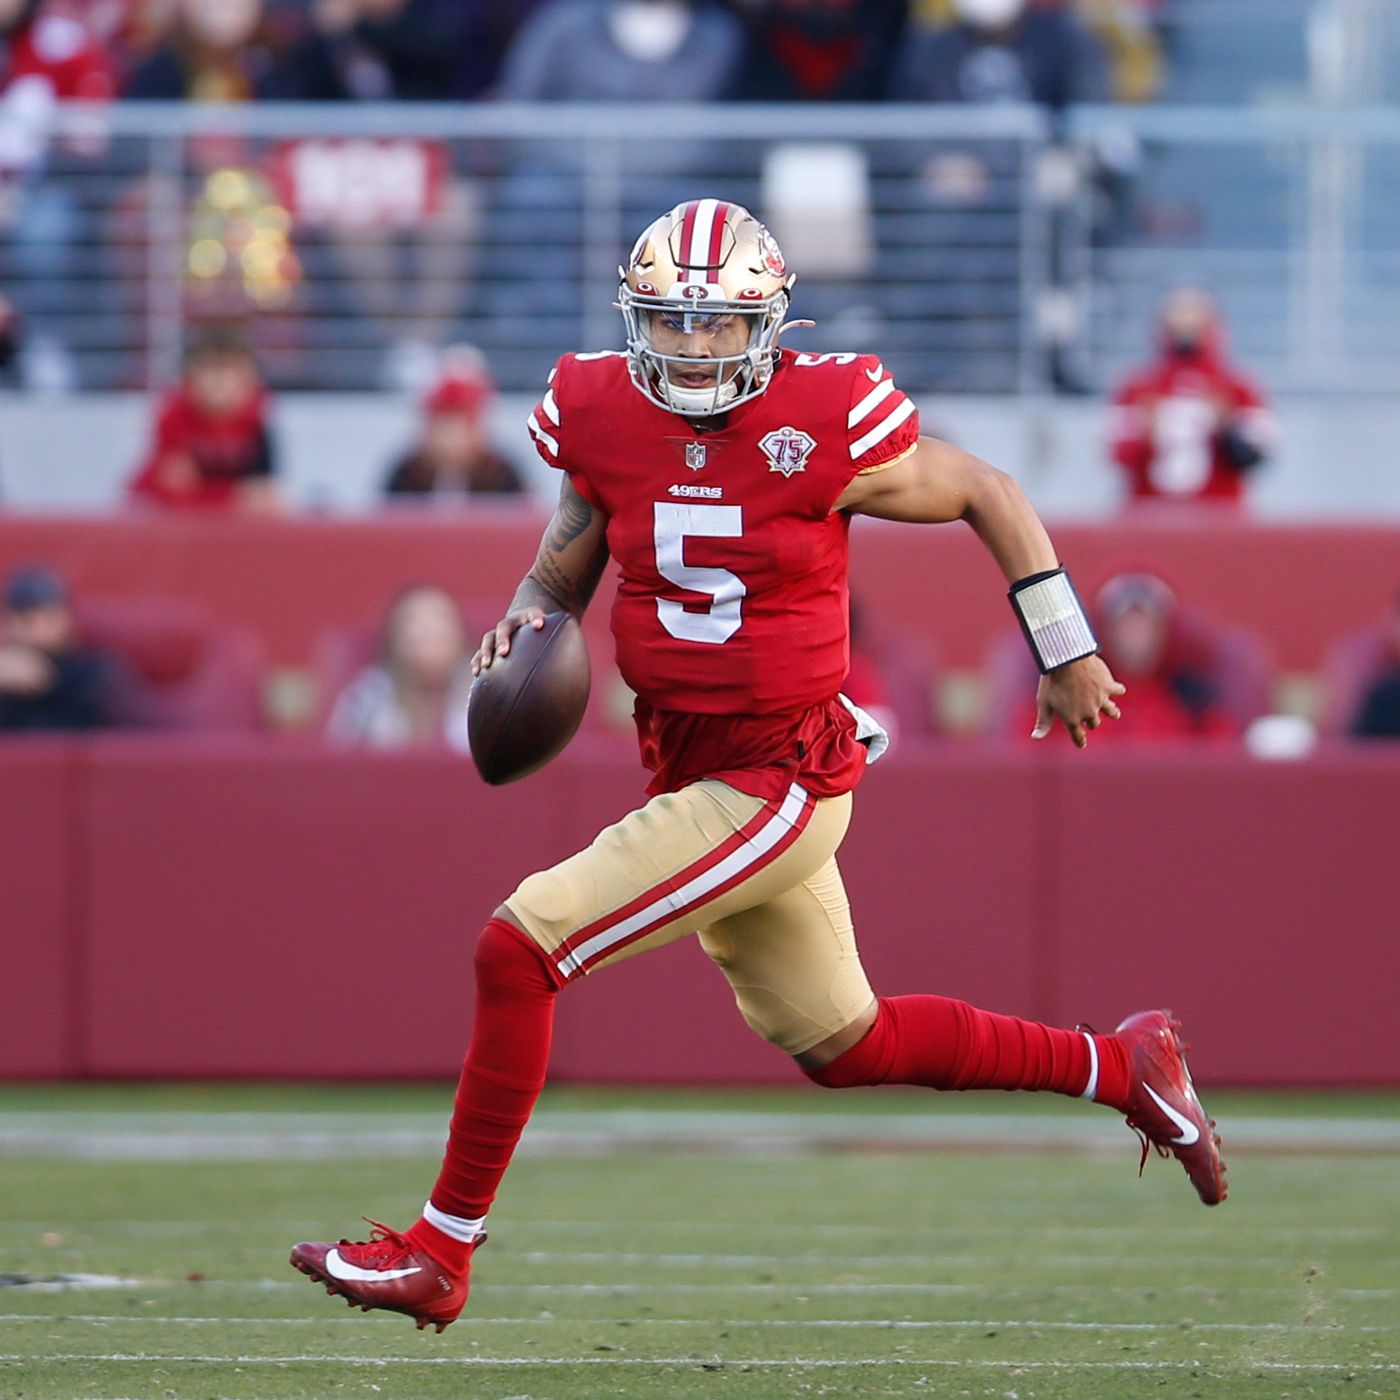 Trey Lance is our quarterback,” 49ers official tells ESPN reporter